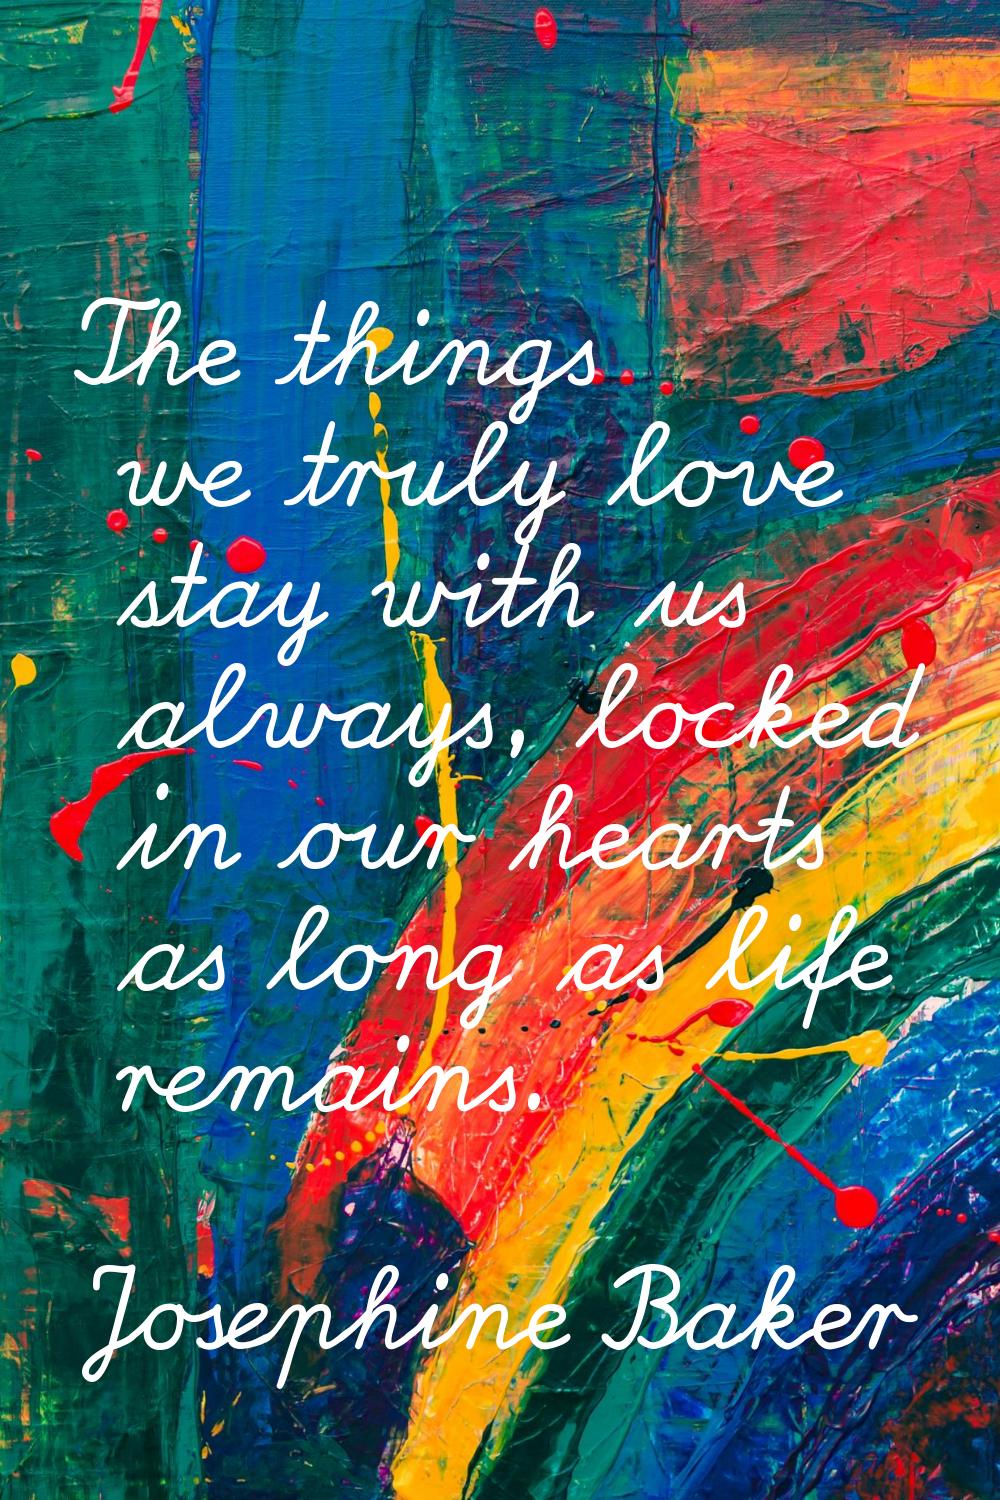 The things we truly love stay with us always, locked in our hearts as long as life remains.